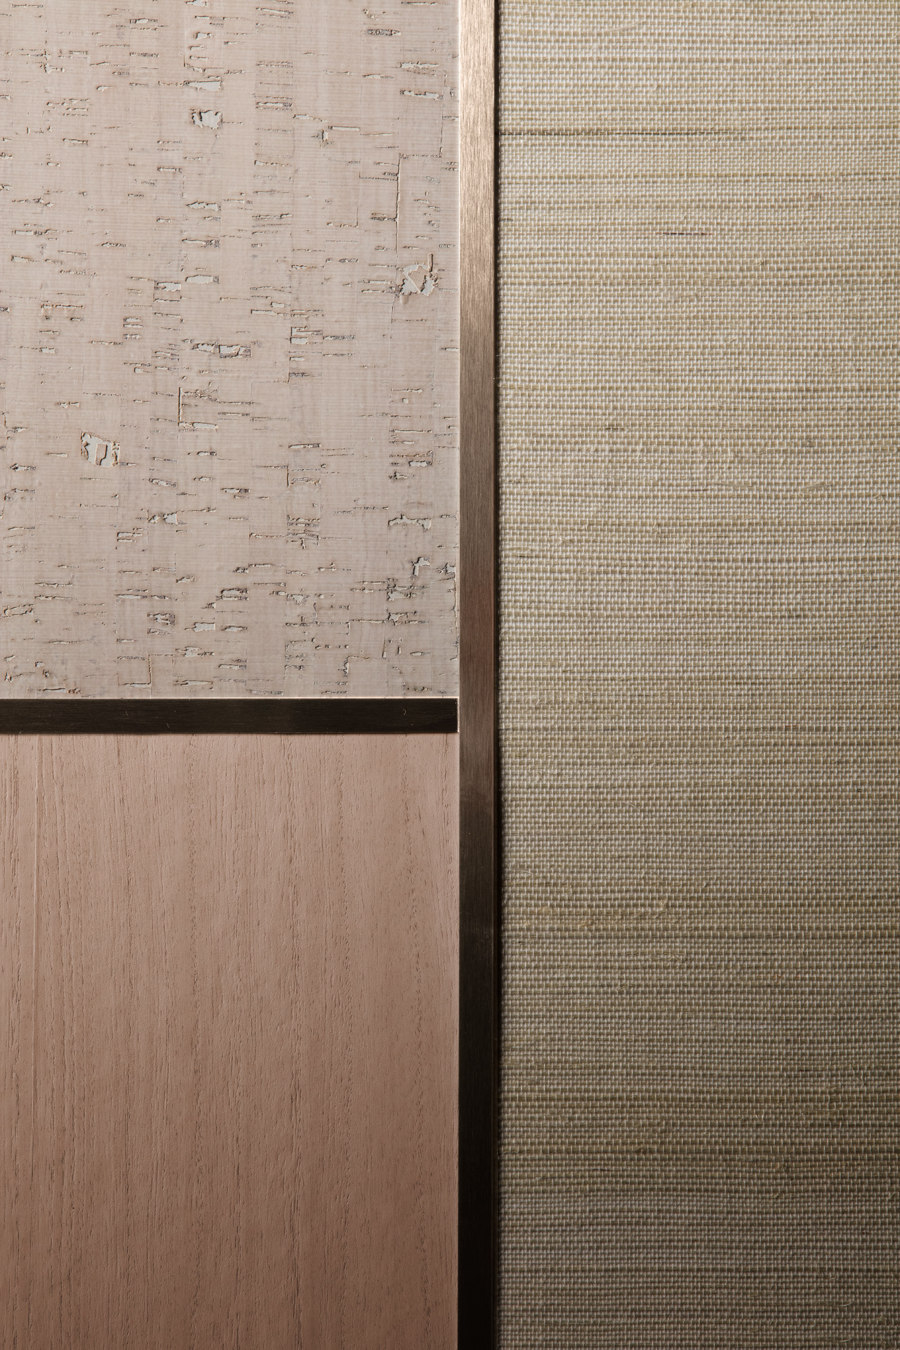 Evoking the beauty of Japanese artistry with large-scale, immersive wallcoverings | Nouveautés